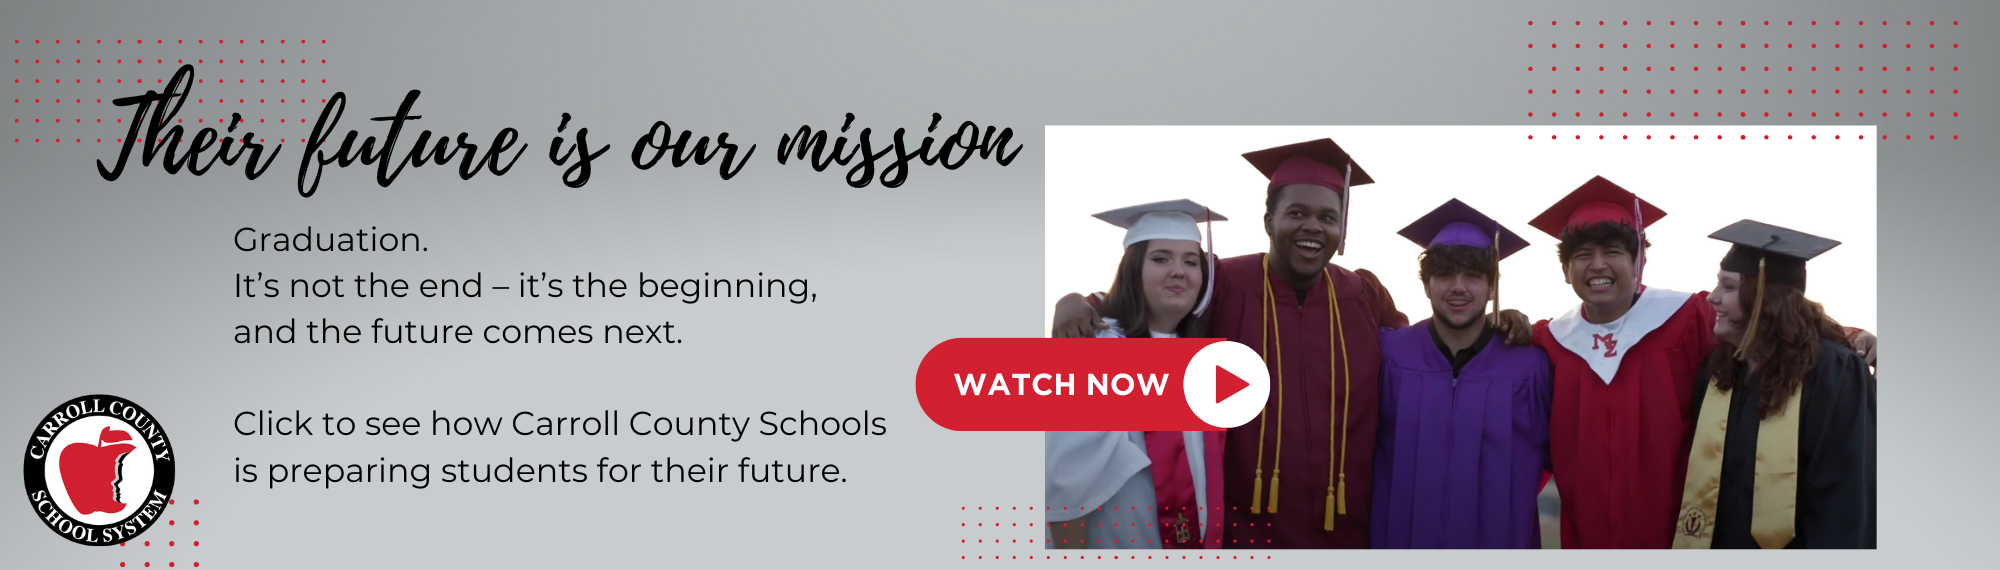 future is our mission carroll county video